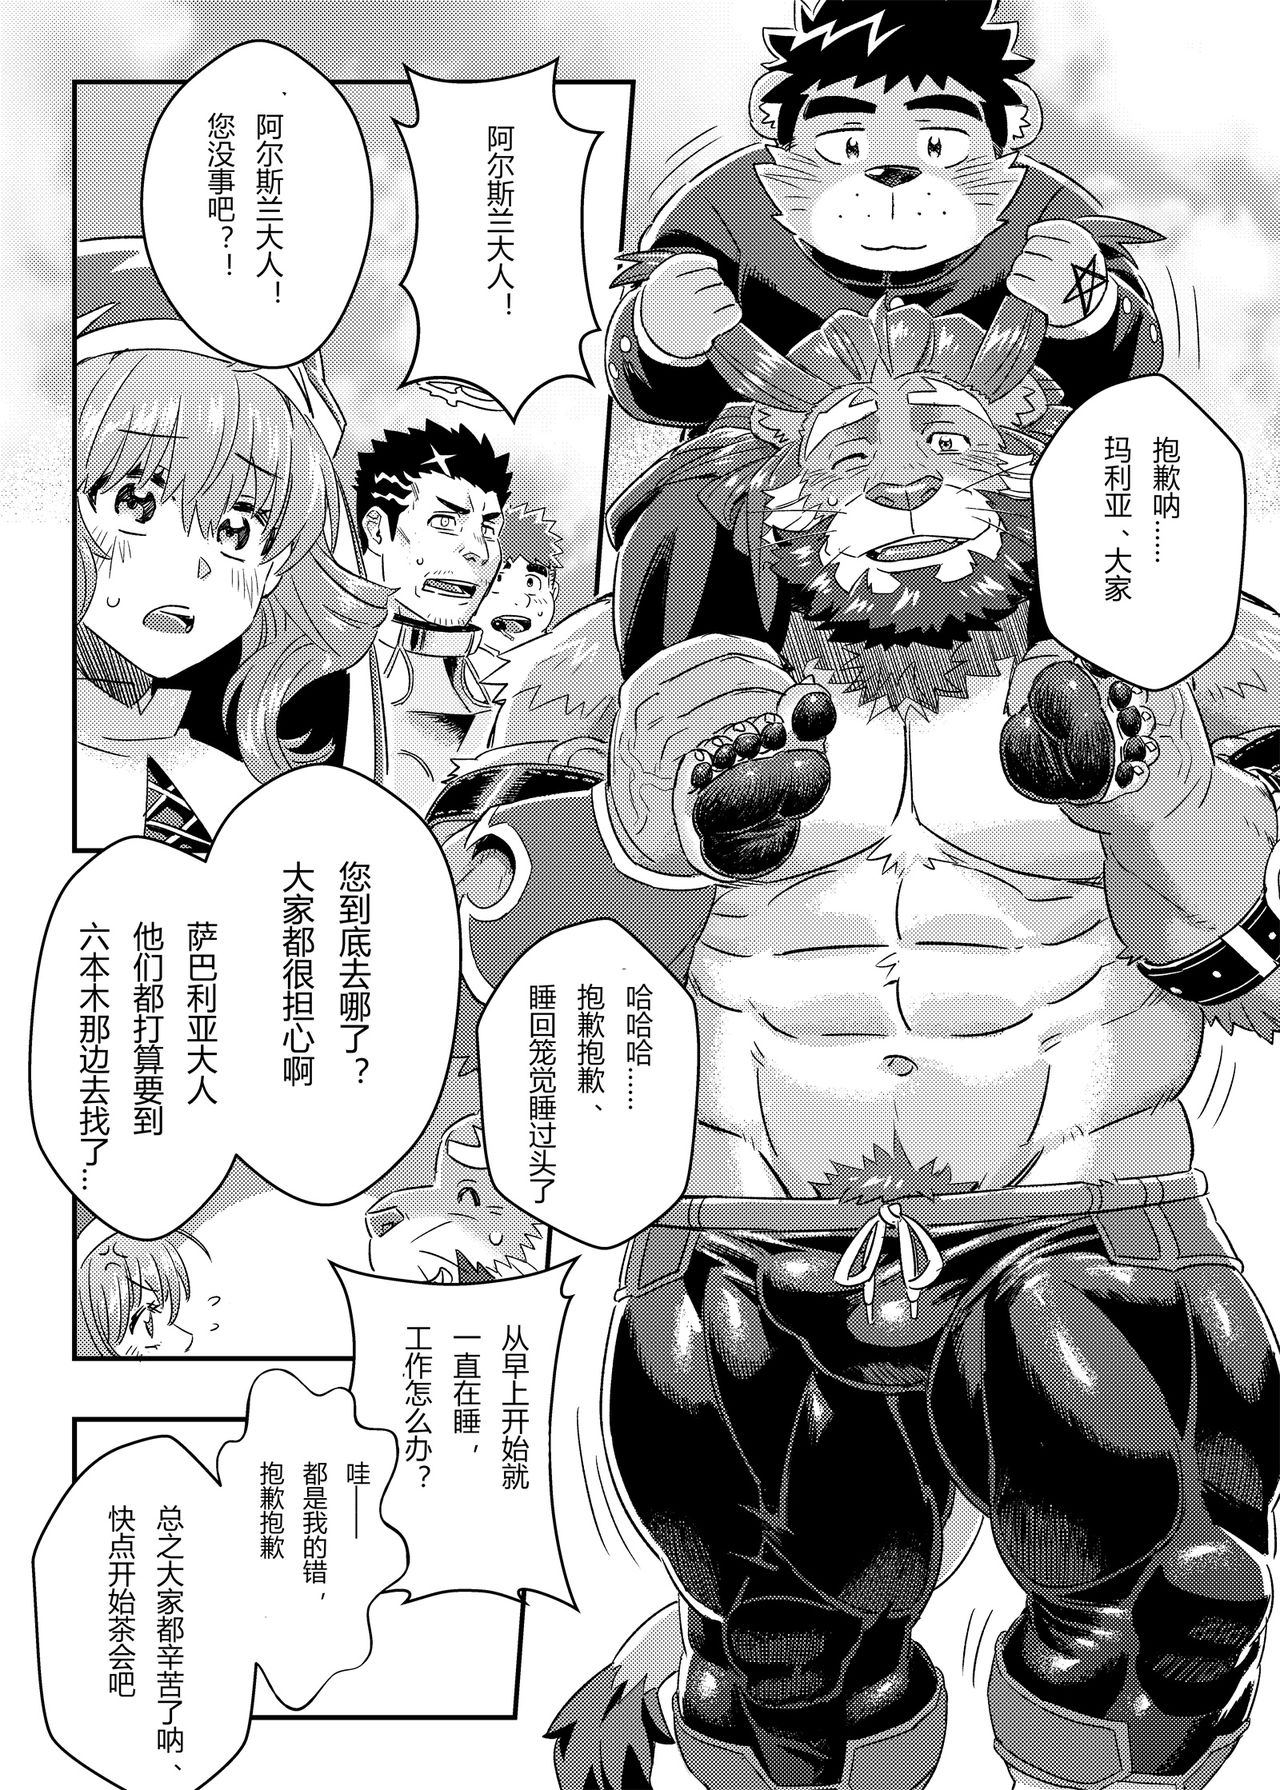 [WILD STYLE (Ross)] King's Dungeon (Tokyo Afterschool Summoners) [Chinese] [Digital] [WILD STYLE (ロス)] キングズダンジョン (東京放課後サモナーズ)  [中国翻訳] [DL版]